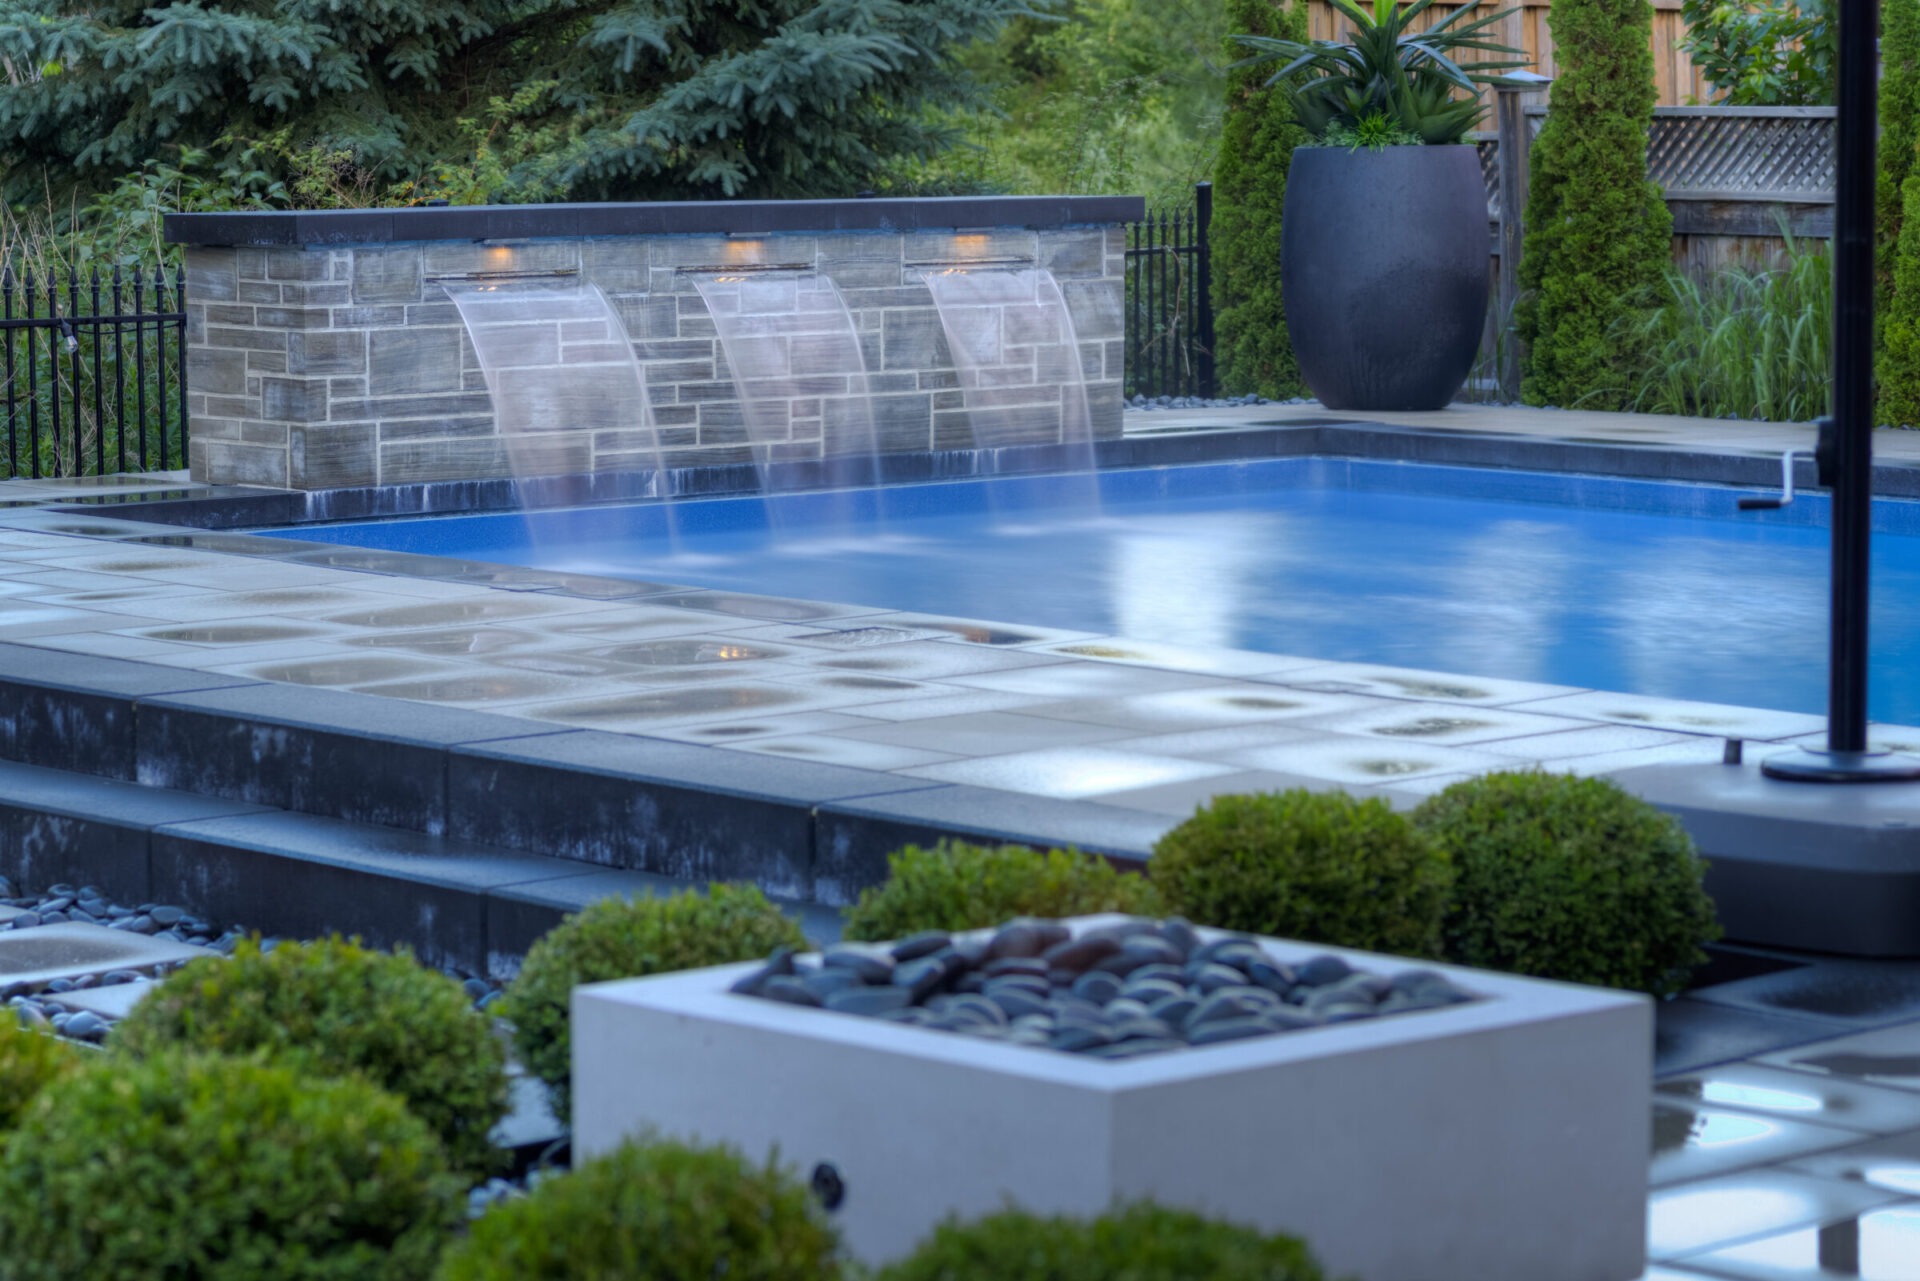 This image displays an elegant outdoor swimming pool with water features streaming down, surrounded by neatly landscaped plants and decorative lighting.